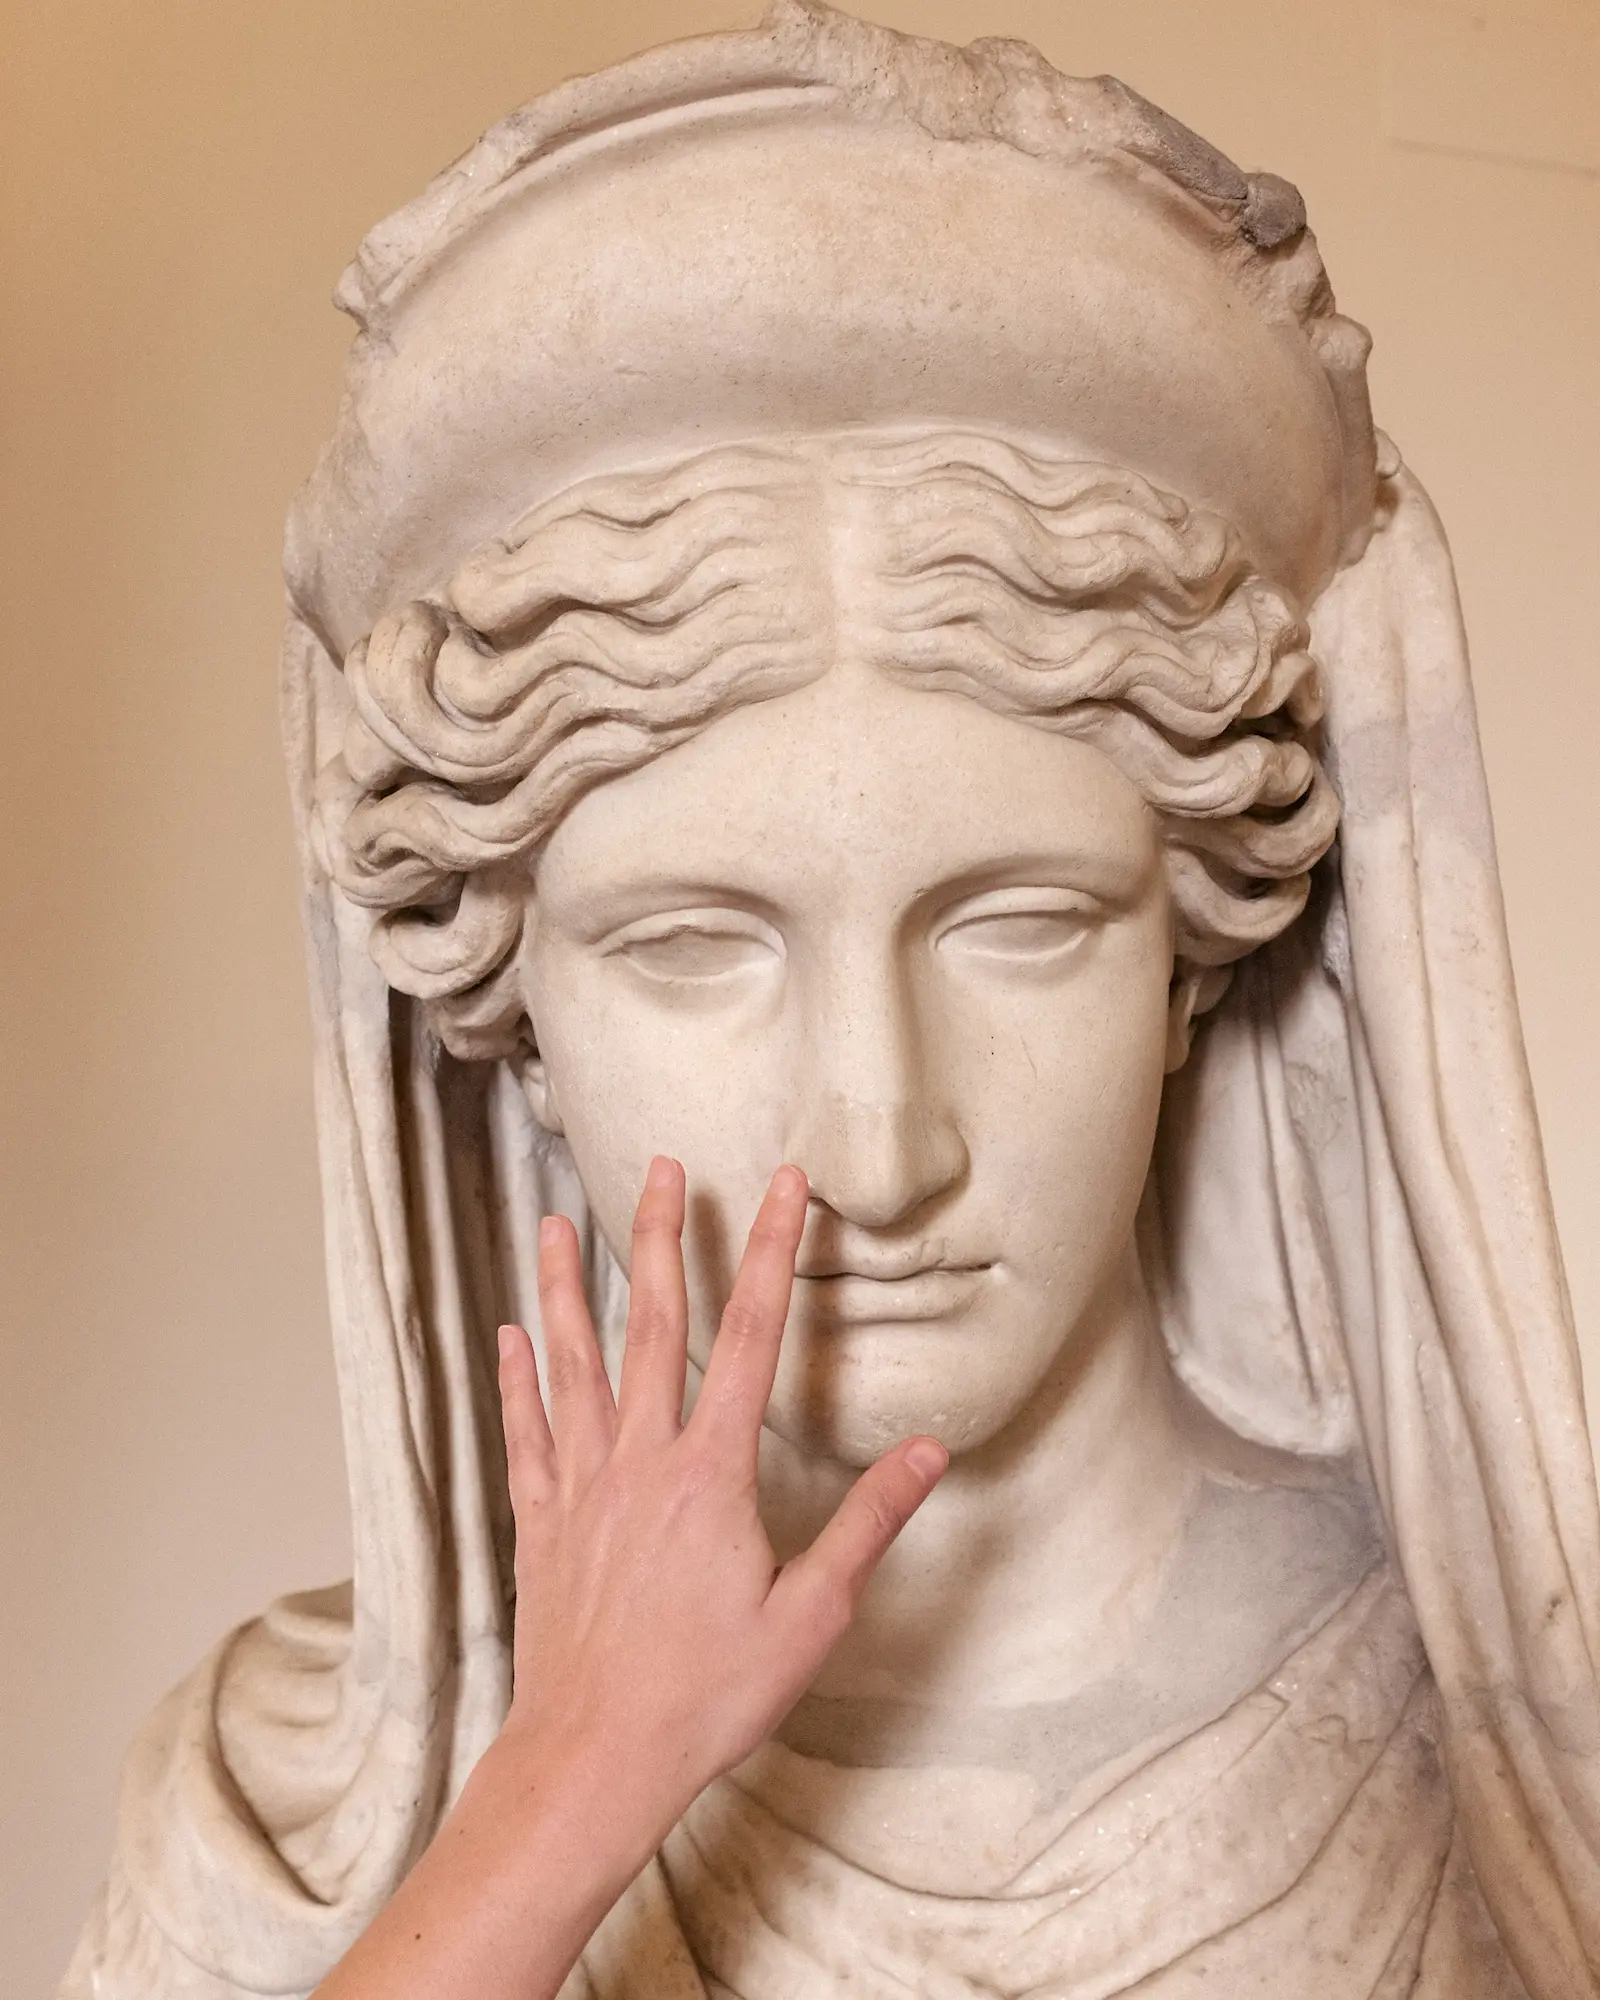 Hand grasping a statue